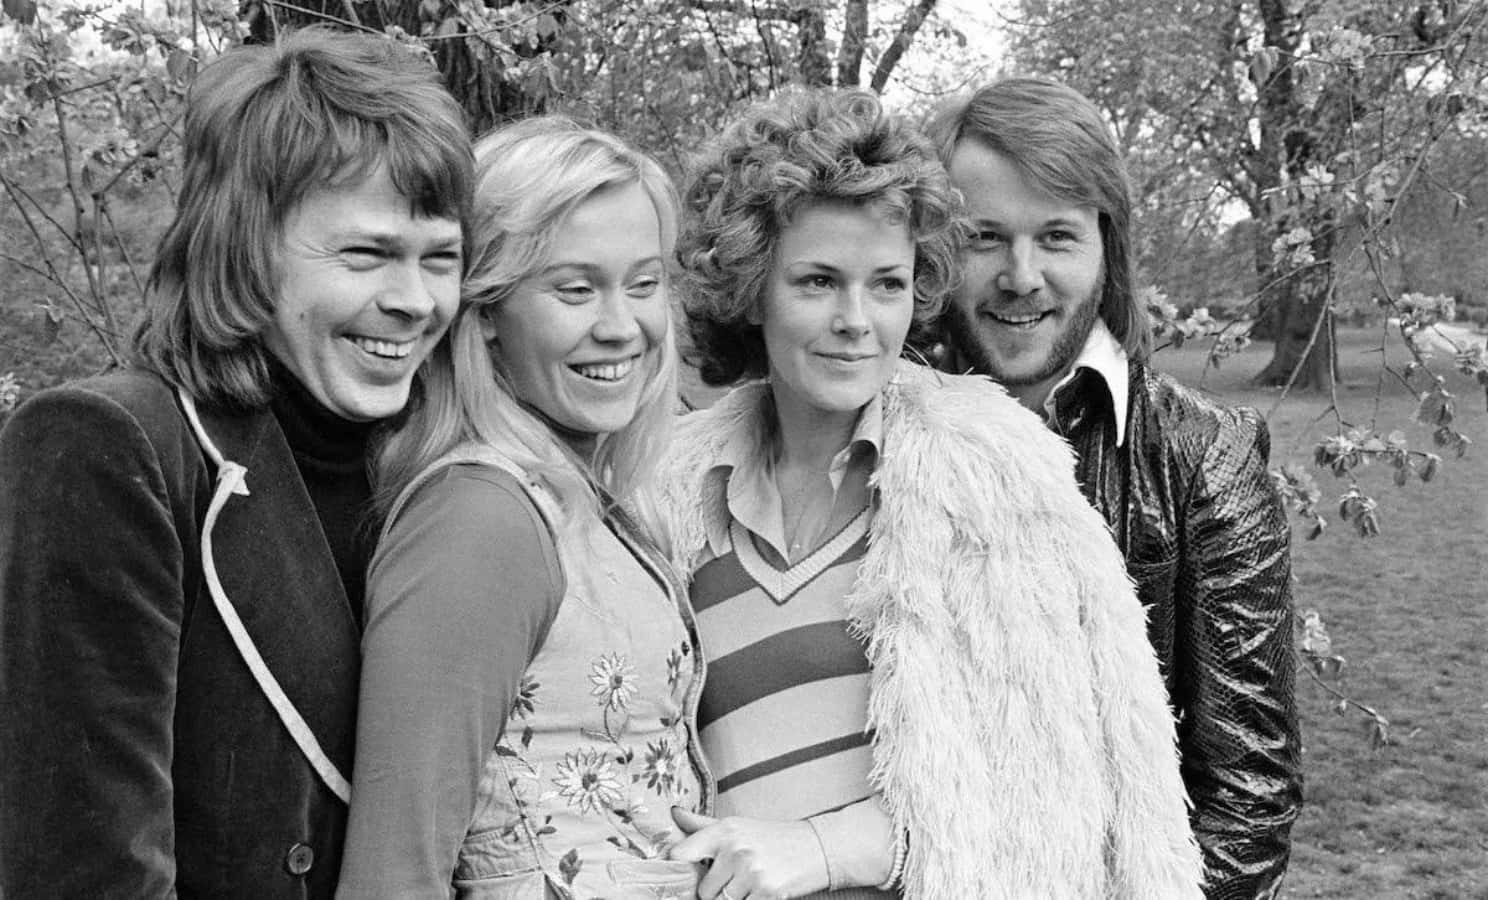 Four members of ABBA come together in one picture